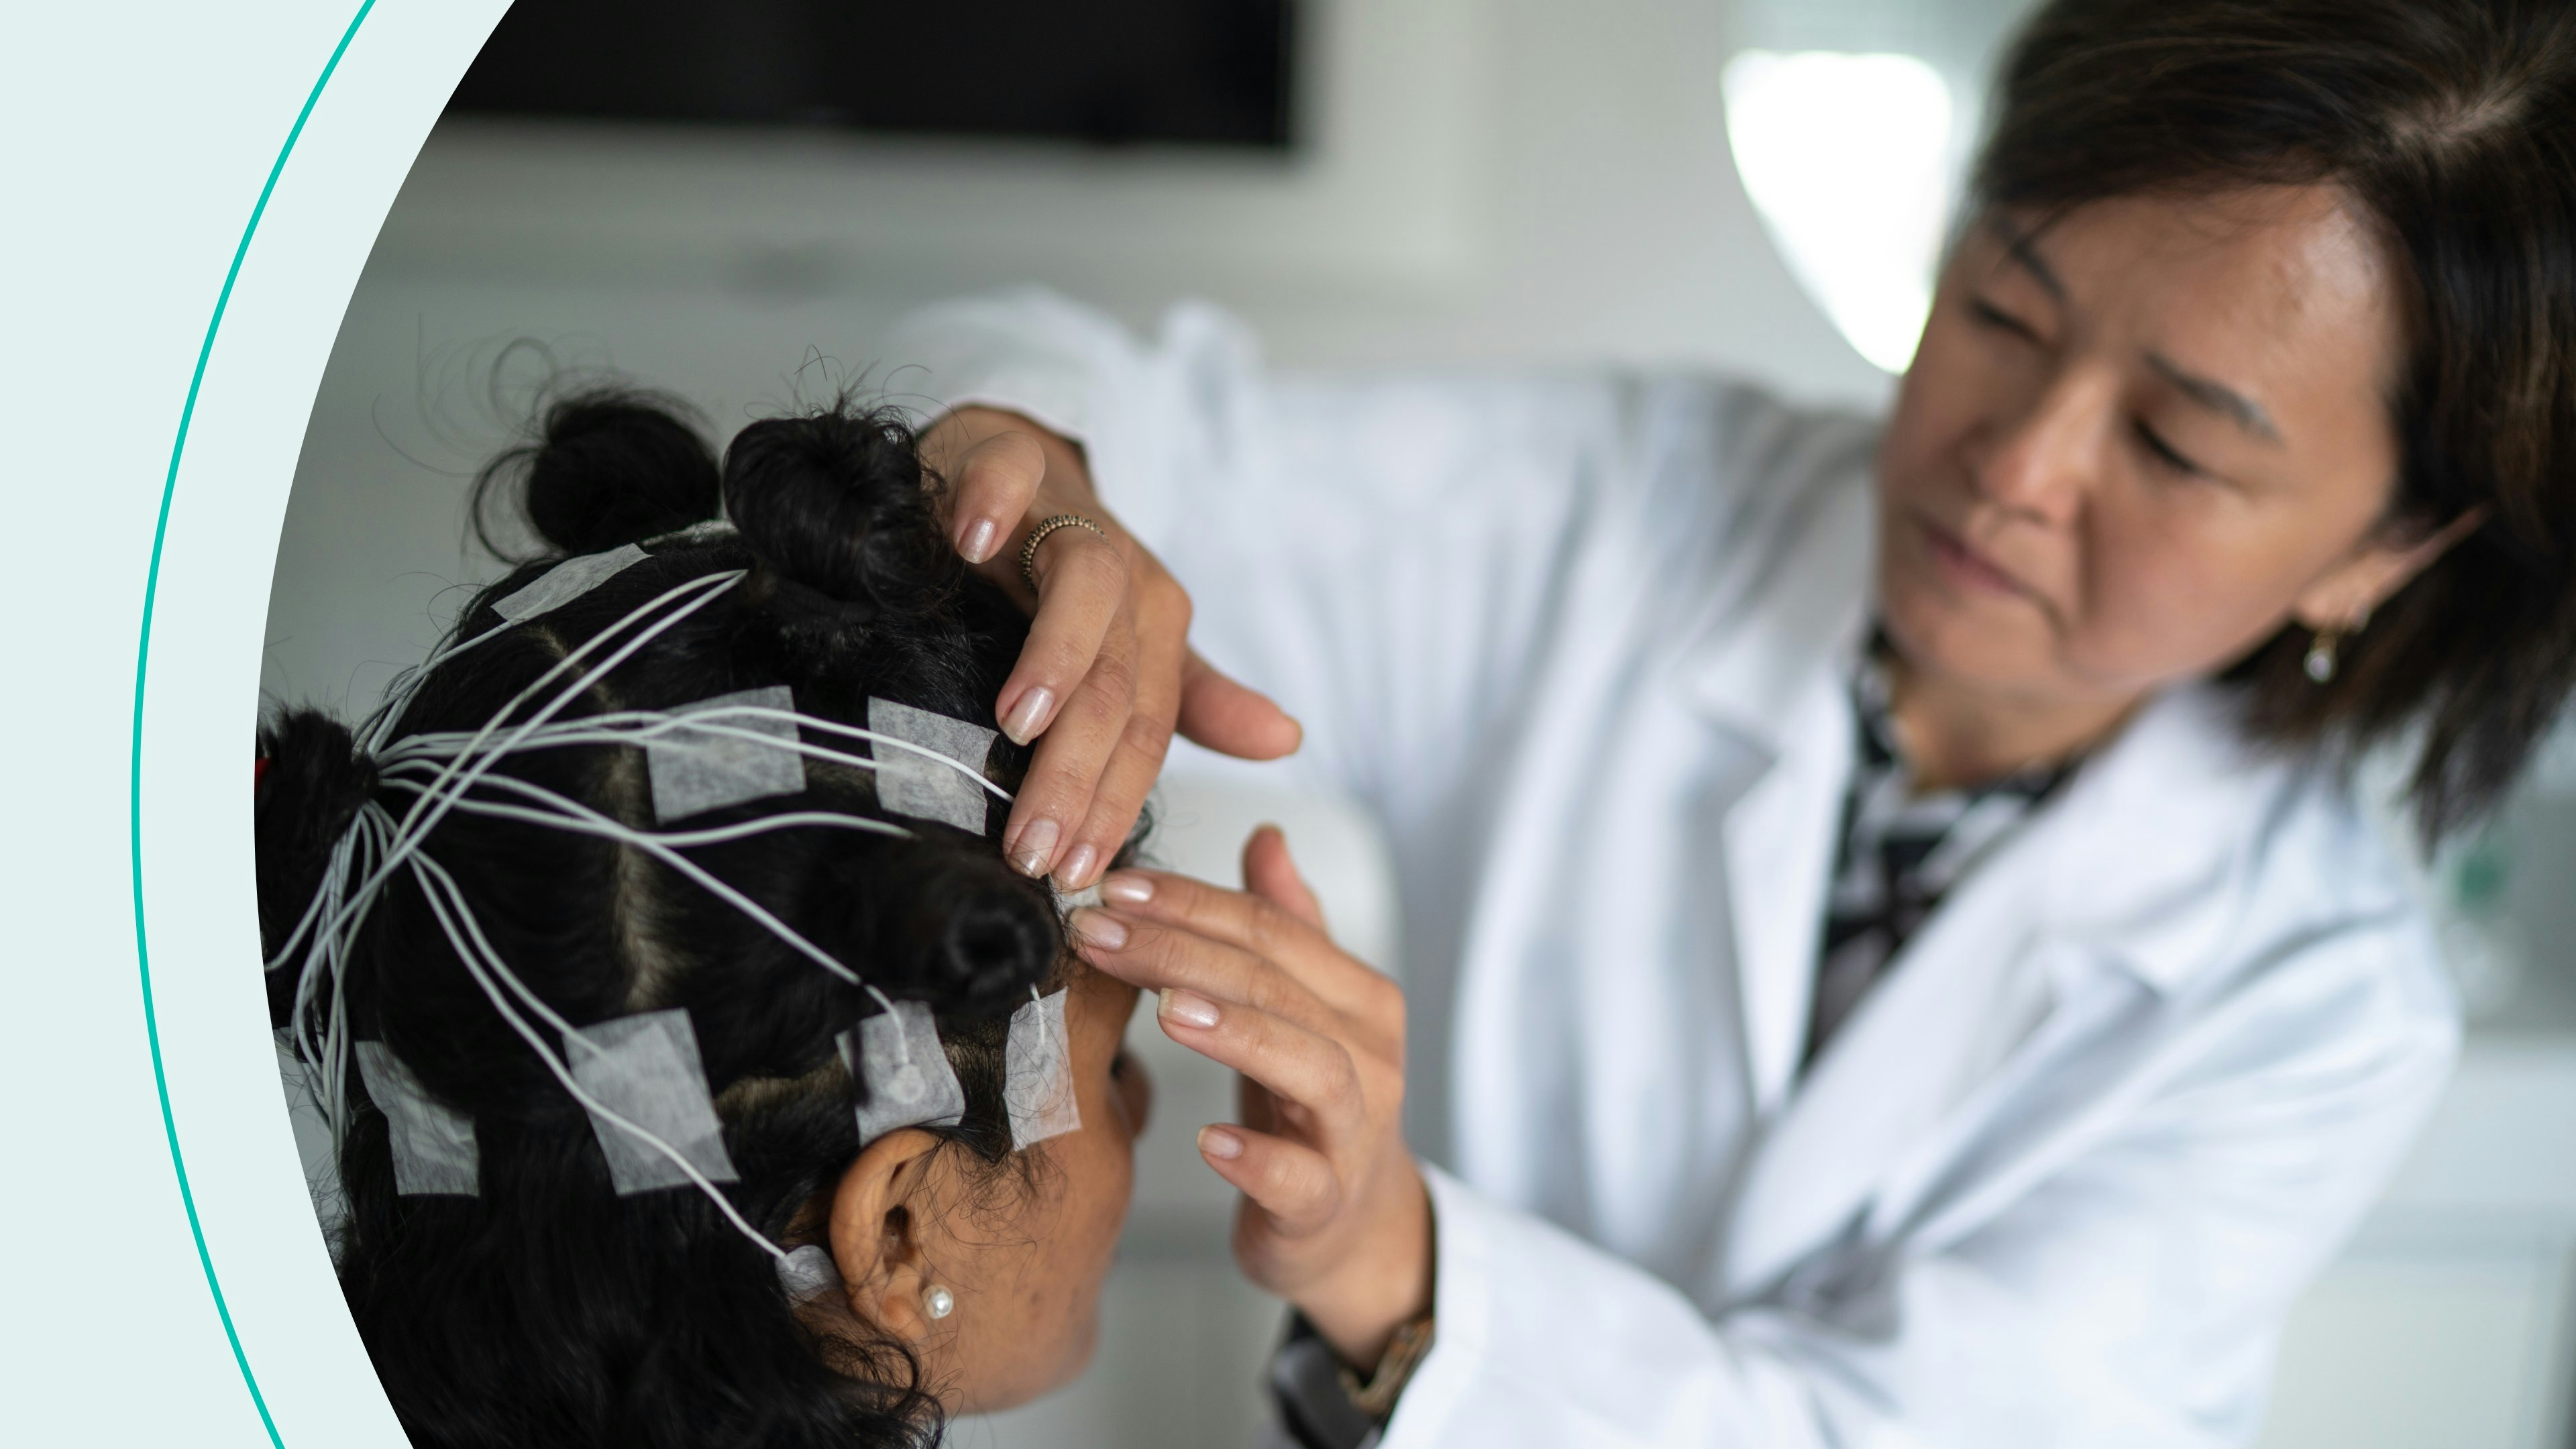 A doctor applying electrodes to a woman's head